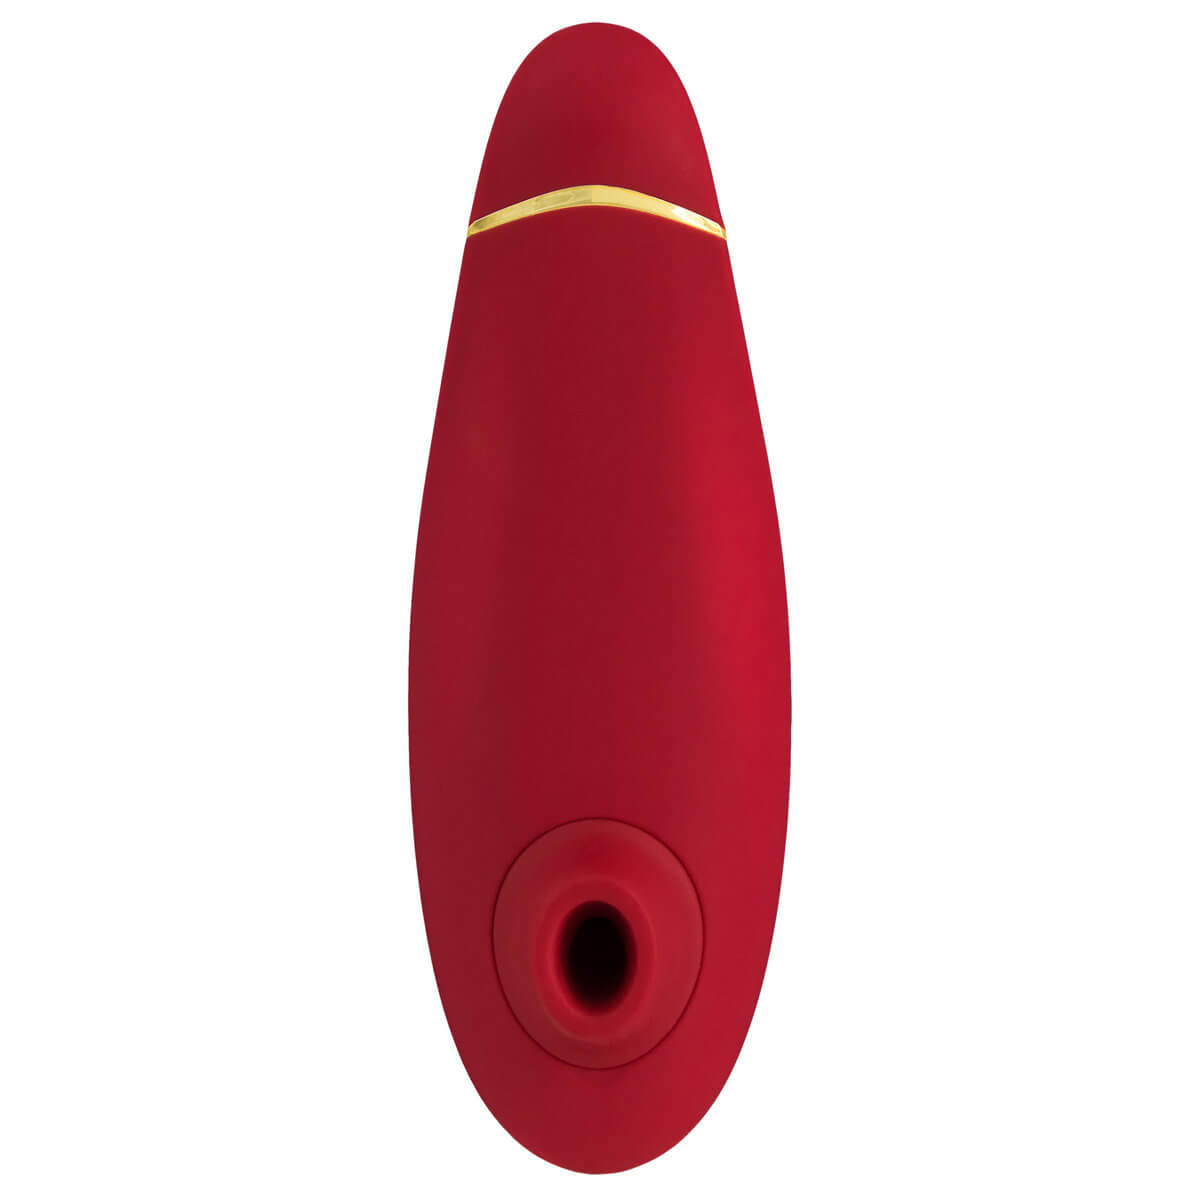 Womanizer Premium Red and Gold